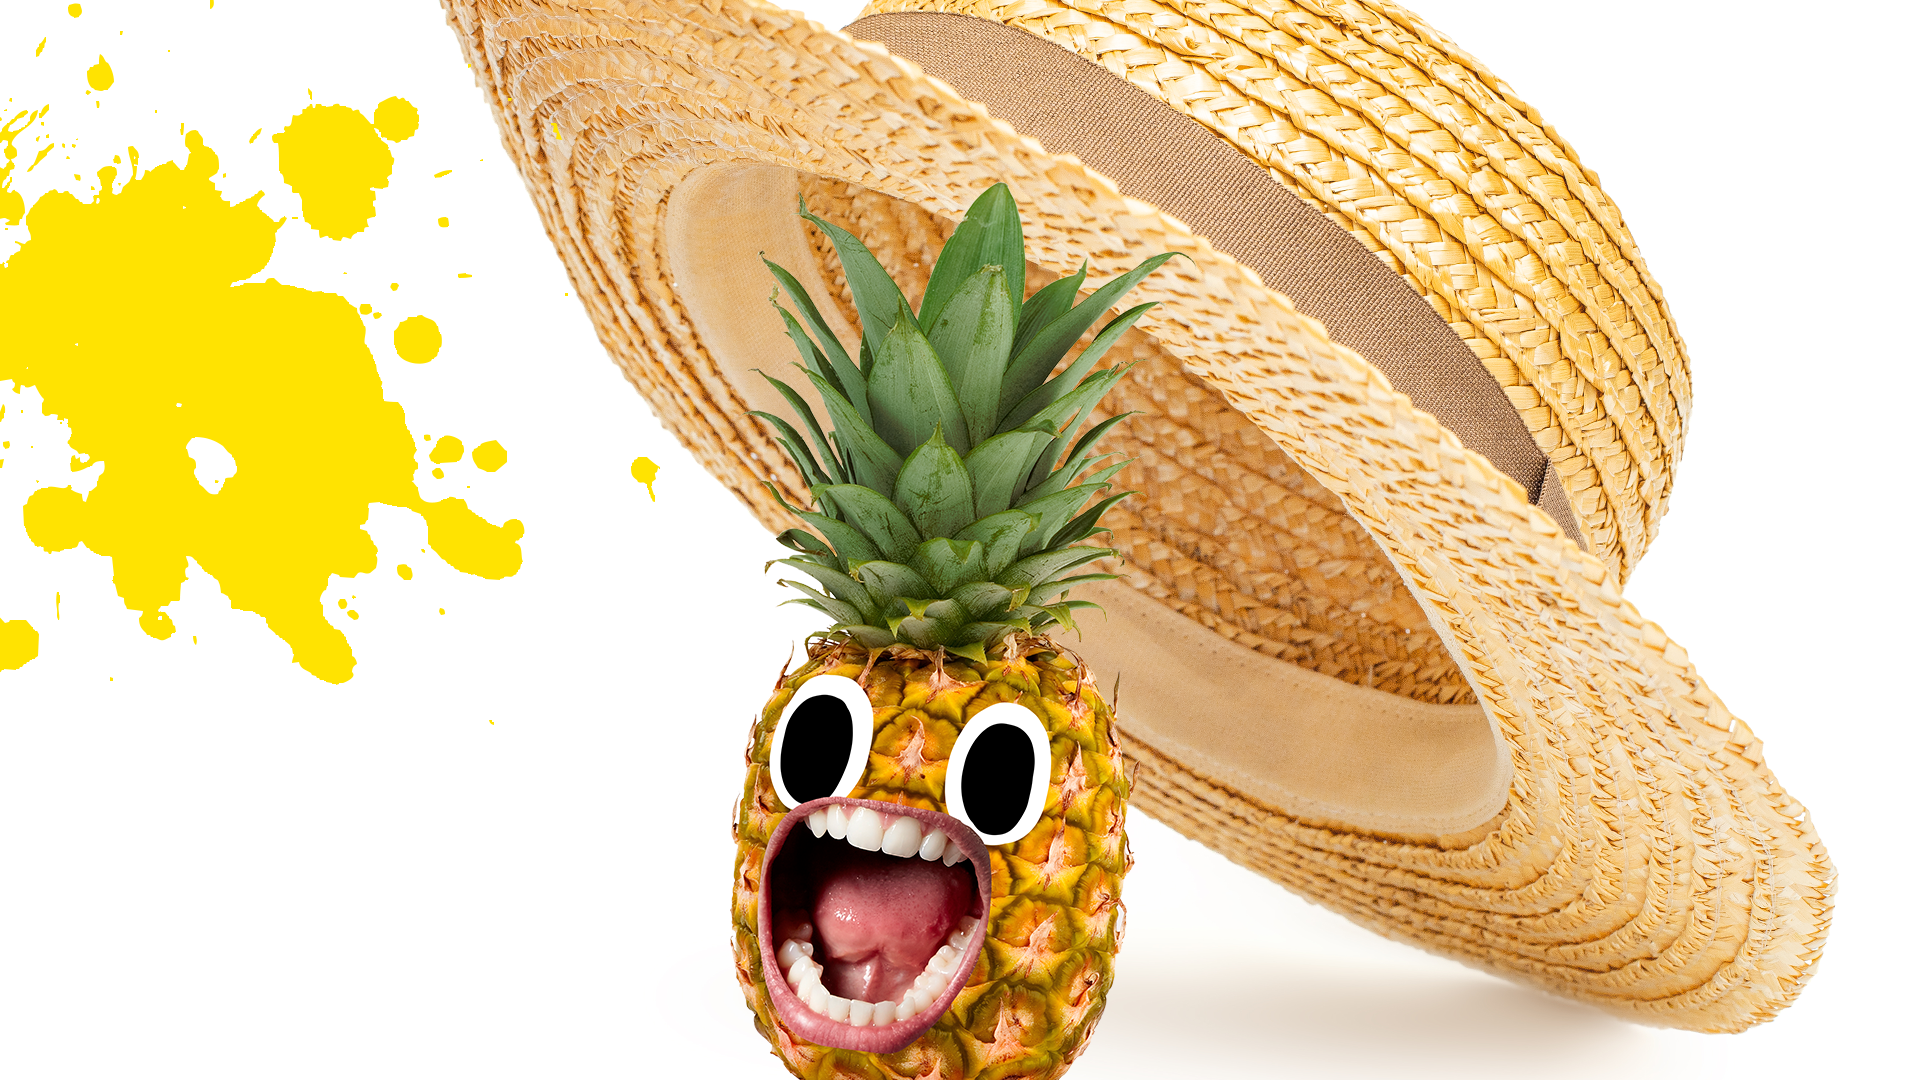 Screaming pineapple with hat and splat